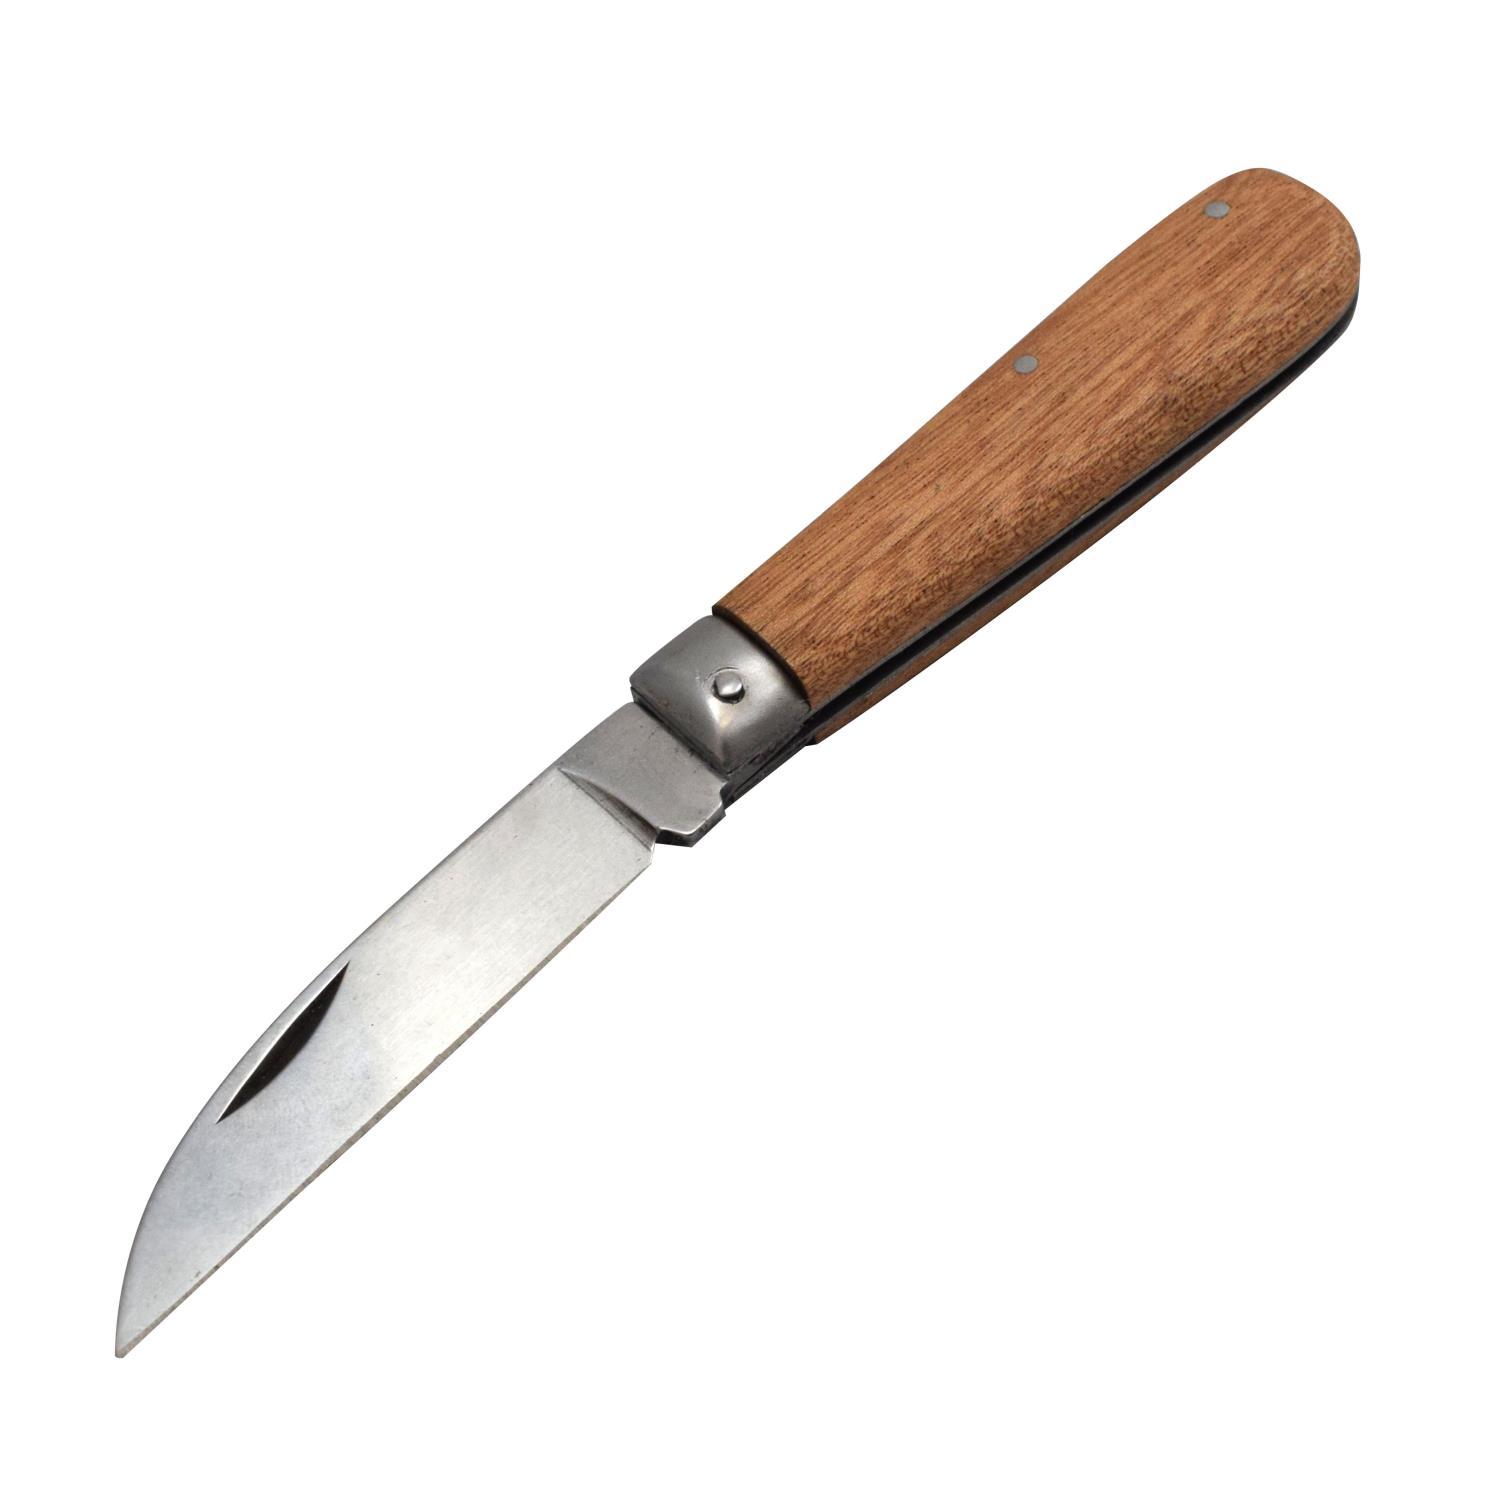 Buy Whitby Wooden Handle Pocket Knife CK122 from Fane Valley Stores